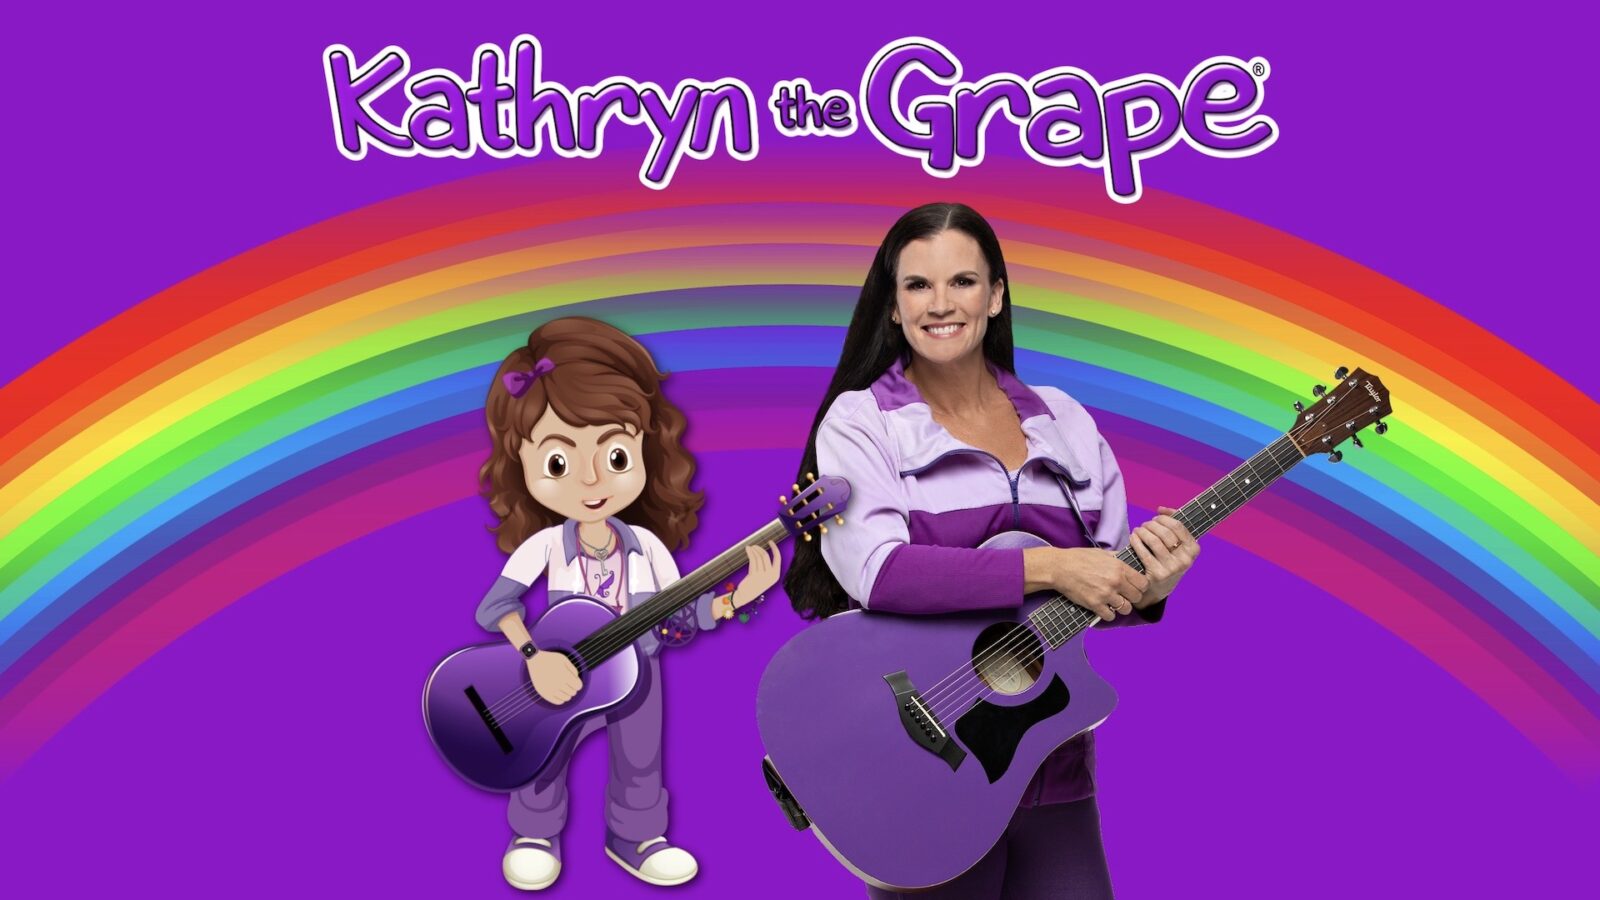 Kathryn the Grape is a 21st Century Mr. Rogers Children's Series Created by Kathryn Cloward